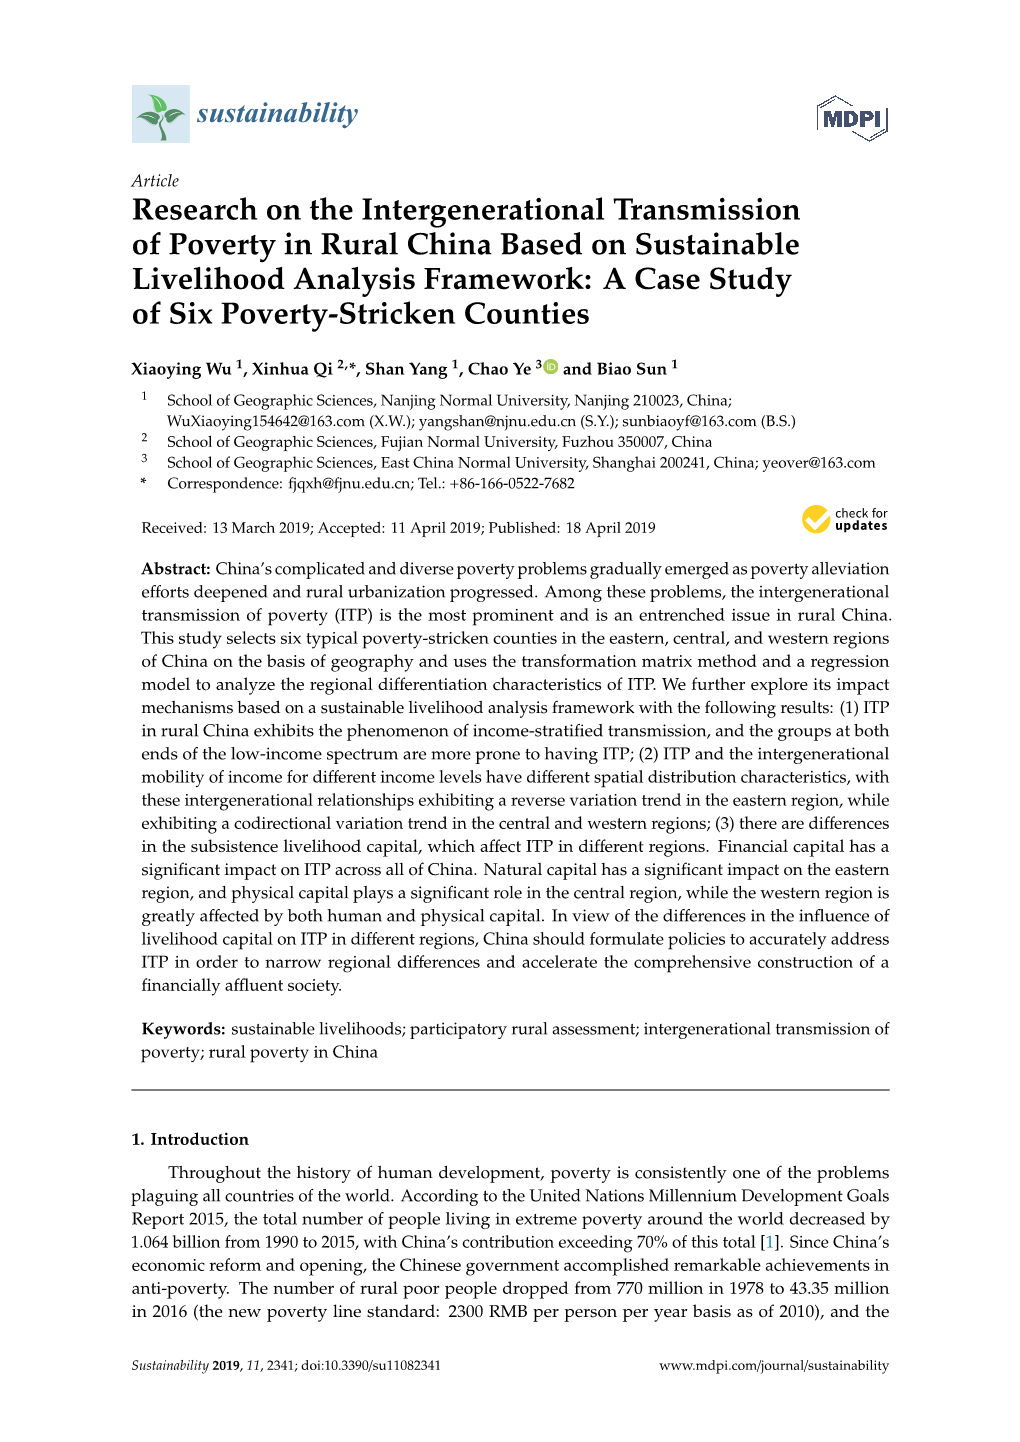 Research on the Intergenerational Transmission of Poverty in Rural China Based on Sustainable Livelihood Analysis Framework